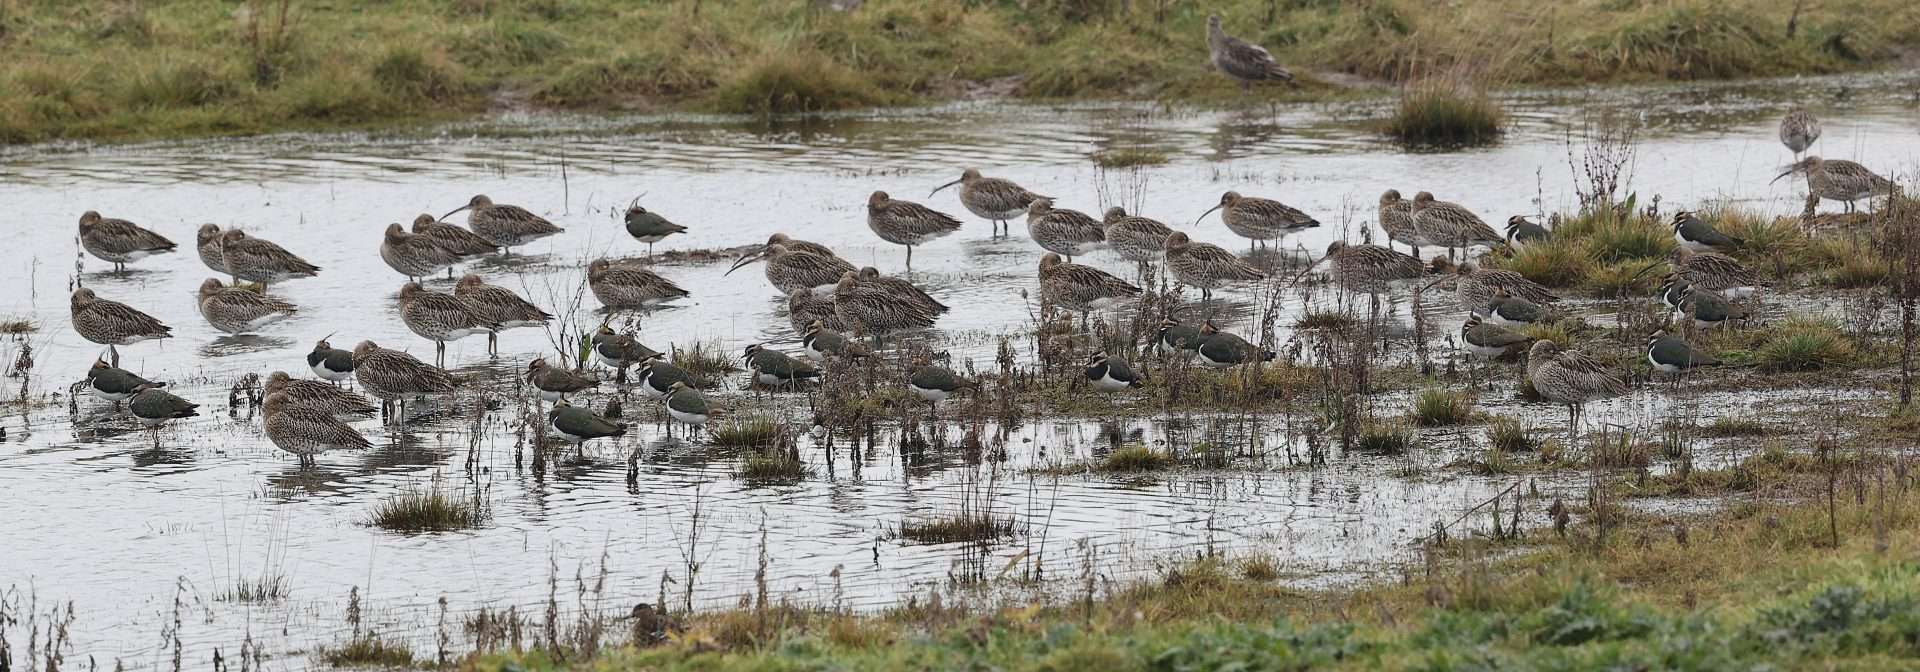 Curlew by Steve Hopper at Exminster marsh